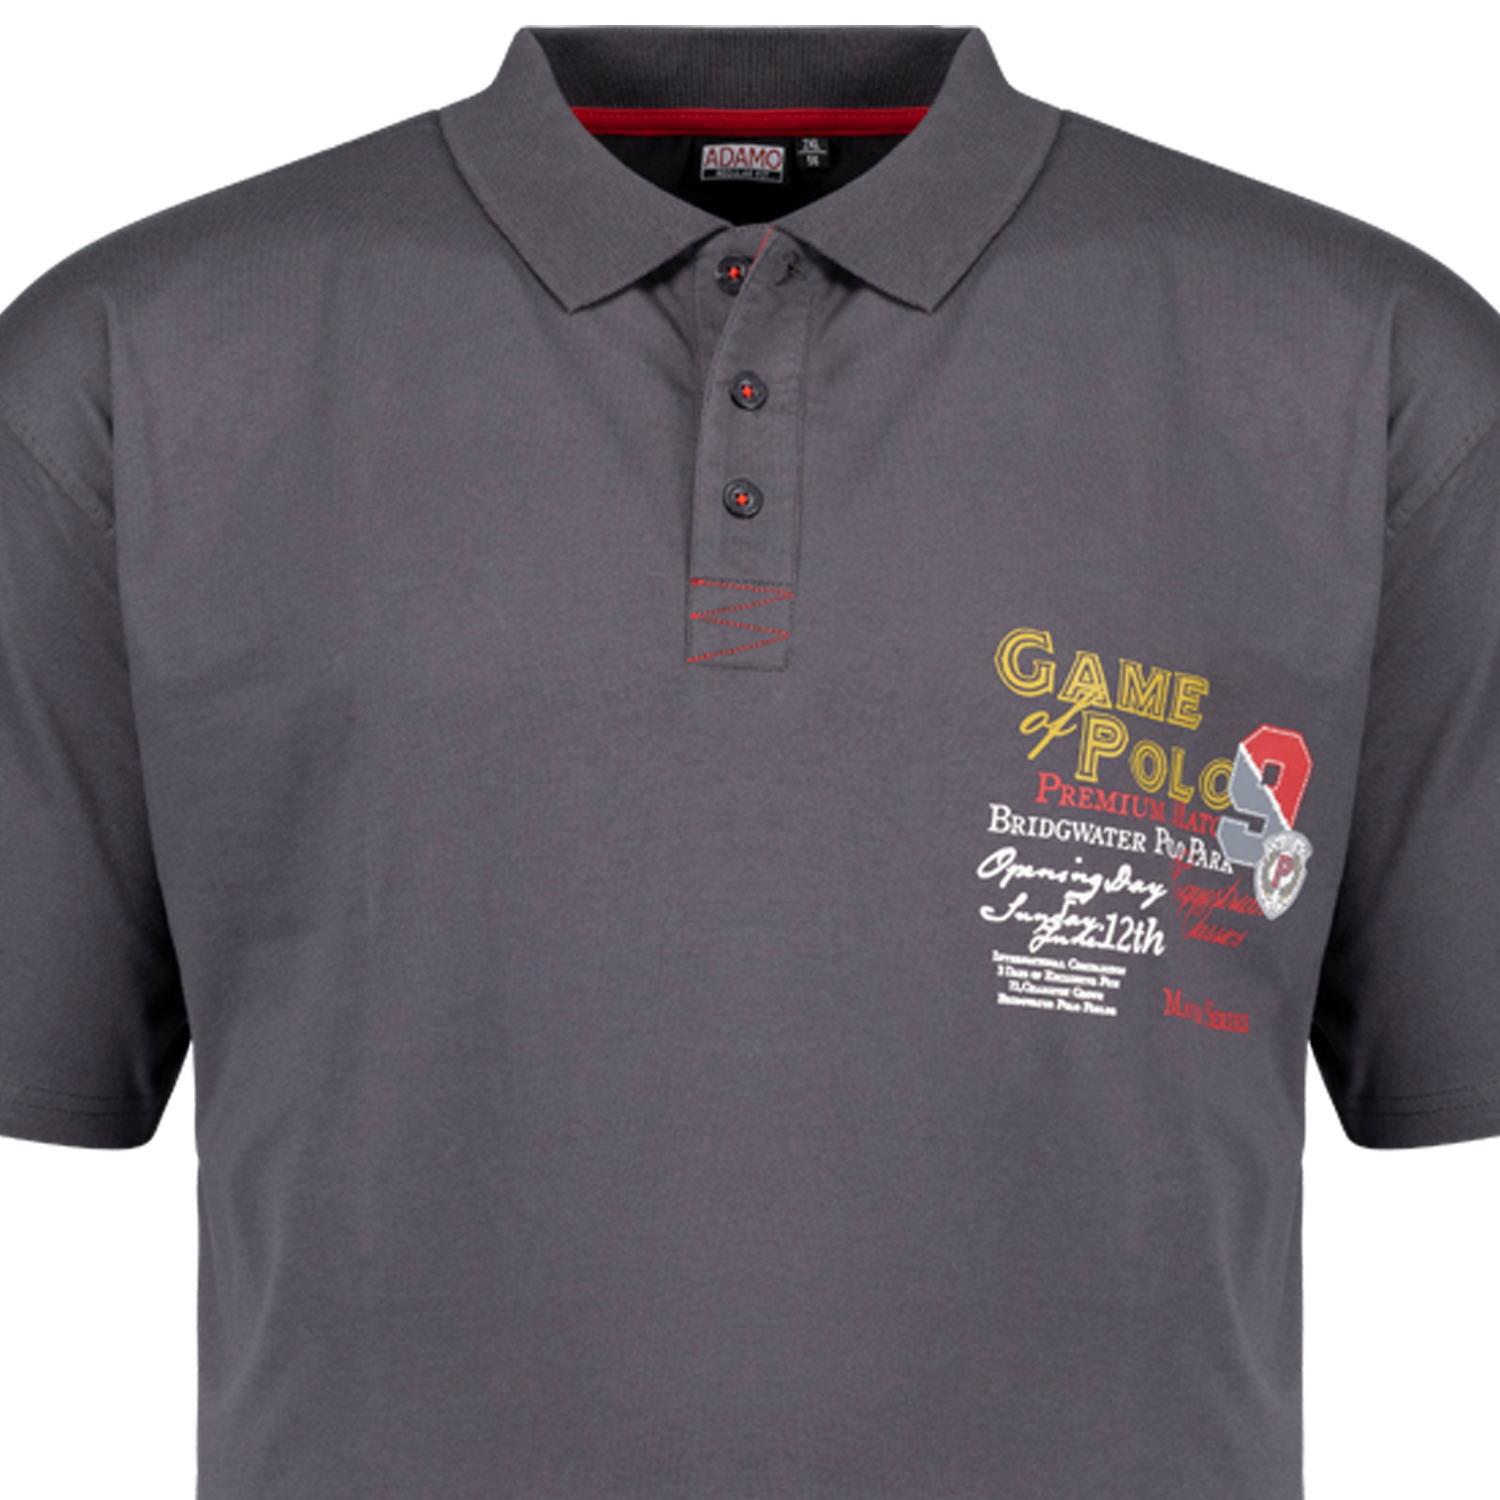 Short sleeve polo shirt with print REGULAR FIT series Perth by Adamo in grey up to oversize 12XL